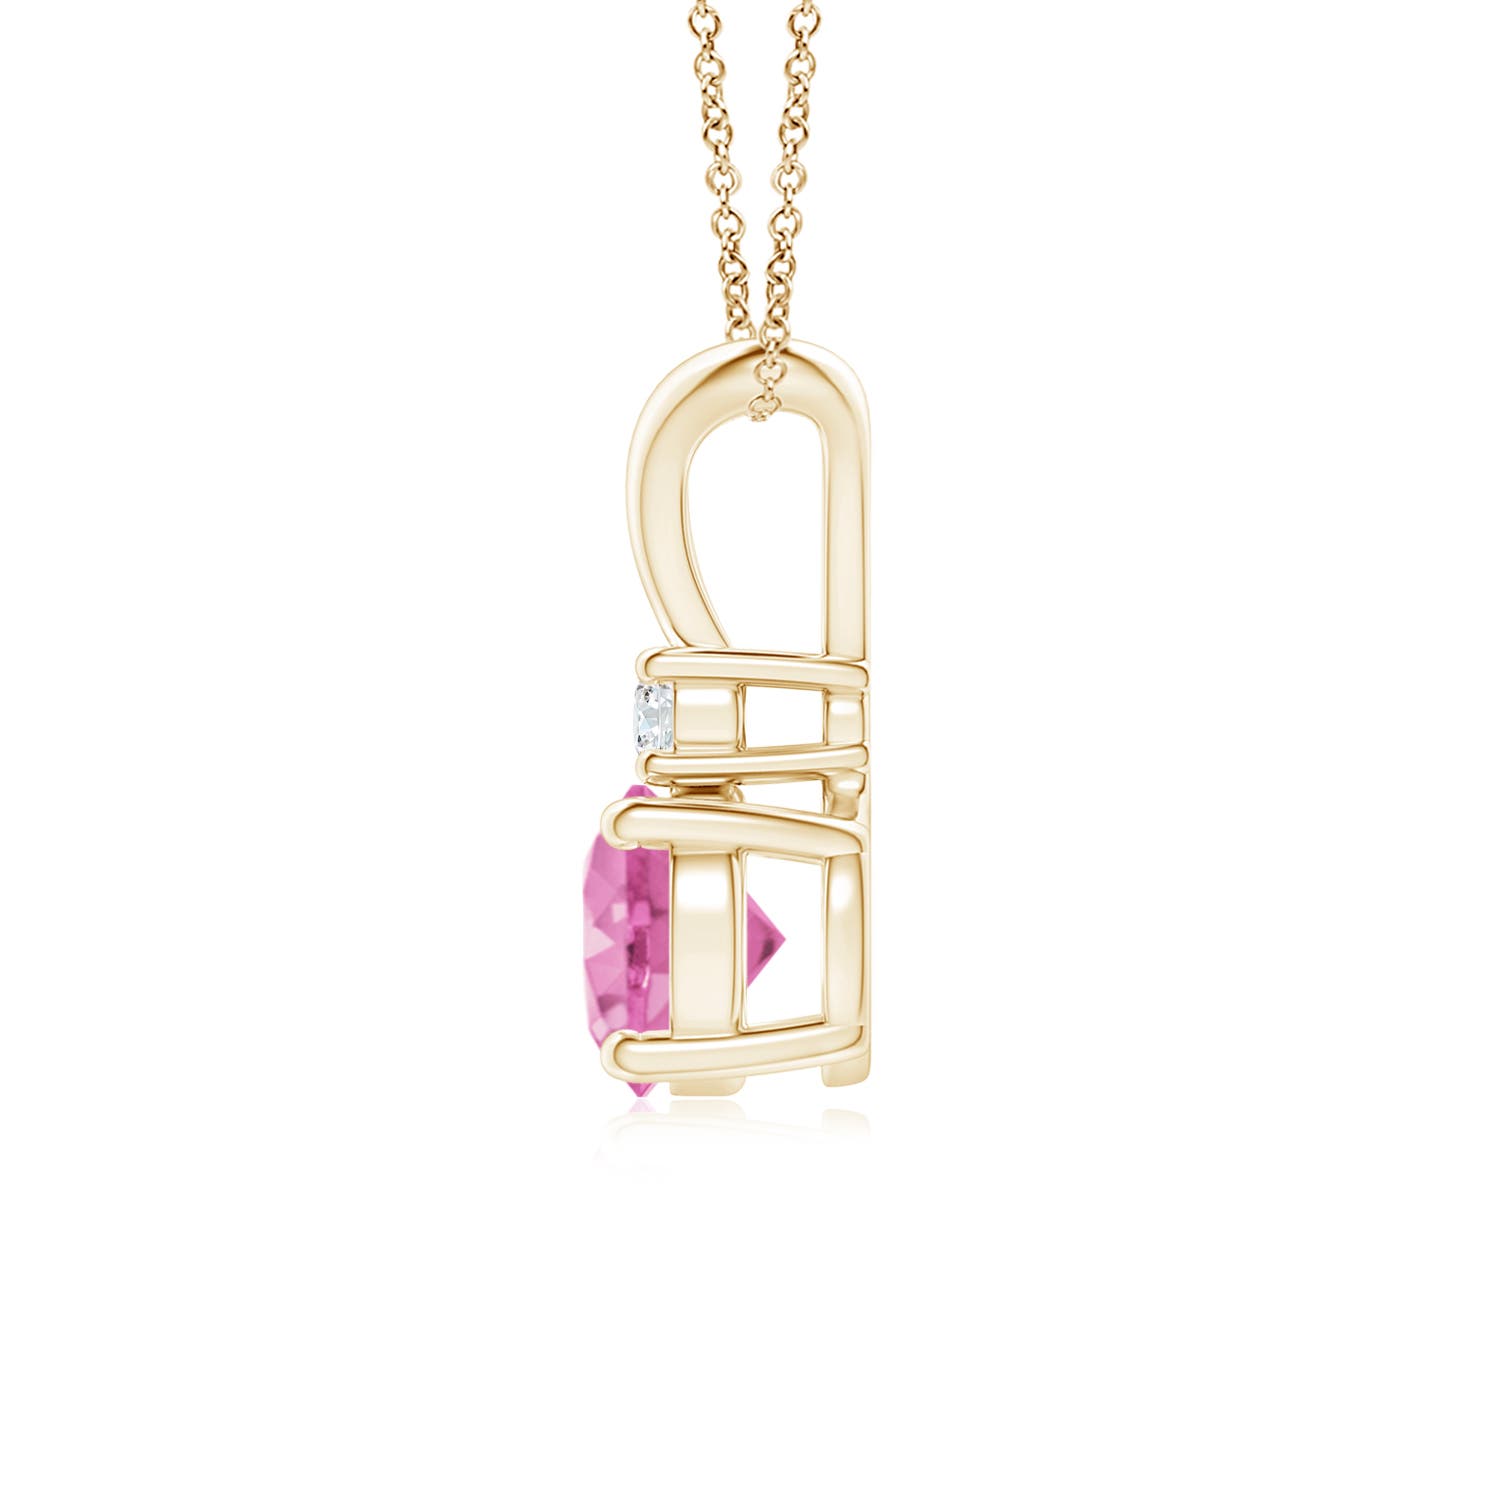 AA - Pink Sapphire / 1.04 CT / 14 KT Yellow Gold